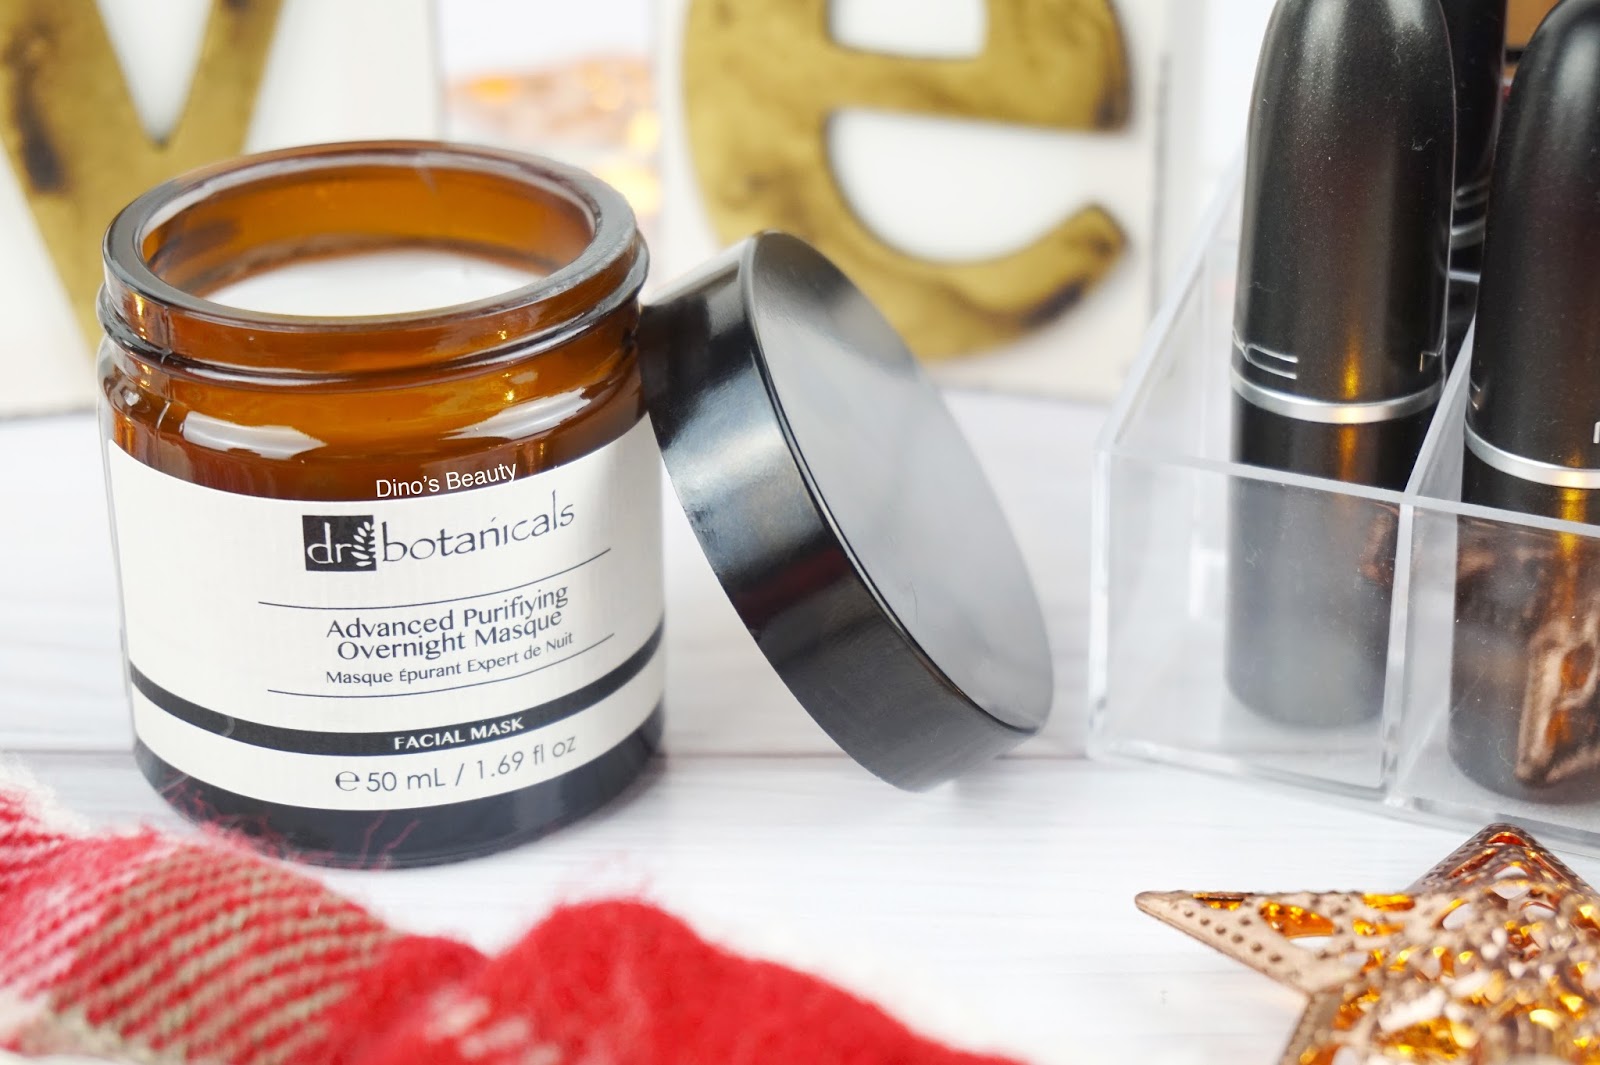 Overnight Masque, Face Mask, Dr Botanicals, Dr Botanicals Advanced Purifying Overnight Masque, Masque, Hydrating, bbloggers, beauty, beauty bloggers, beauty review, Face Cream, Skincare, Skincare Review, Review, Facial Skincare